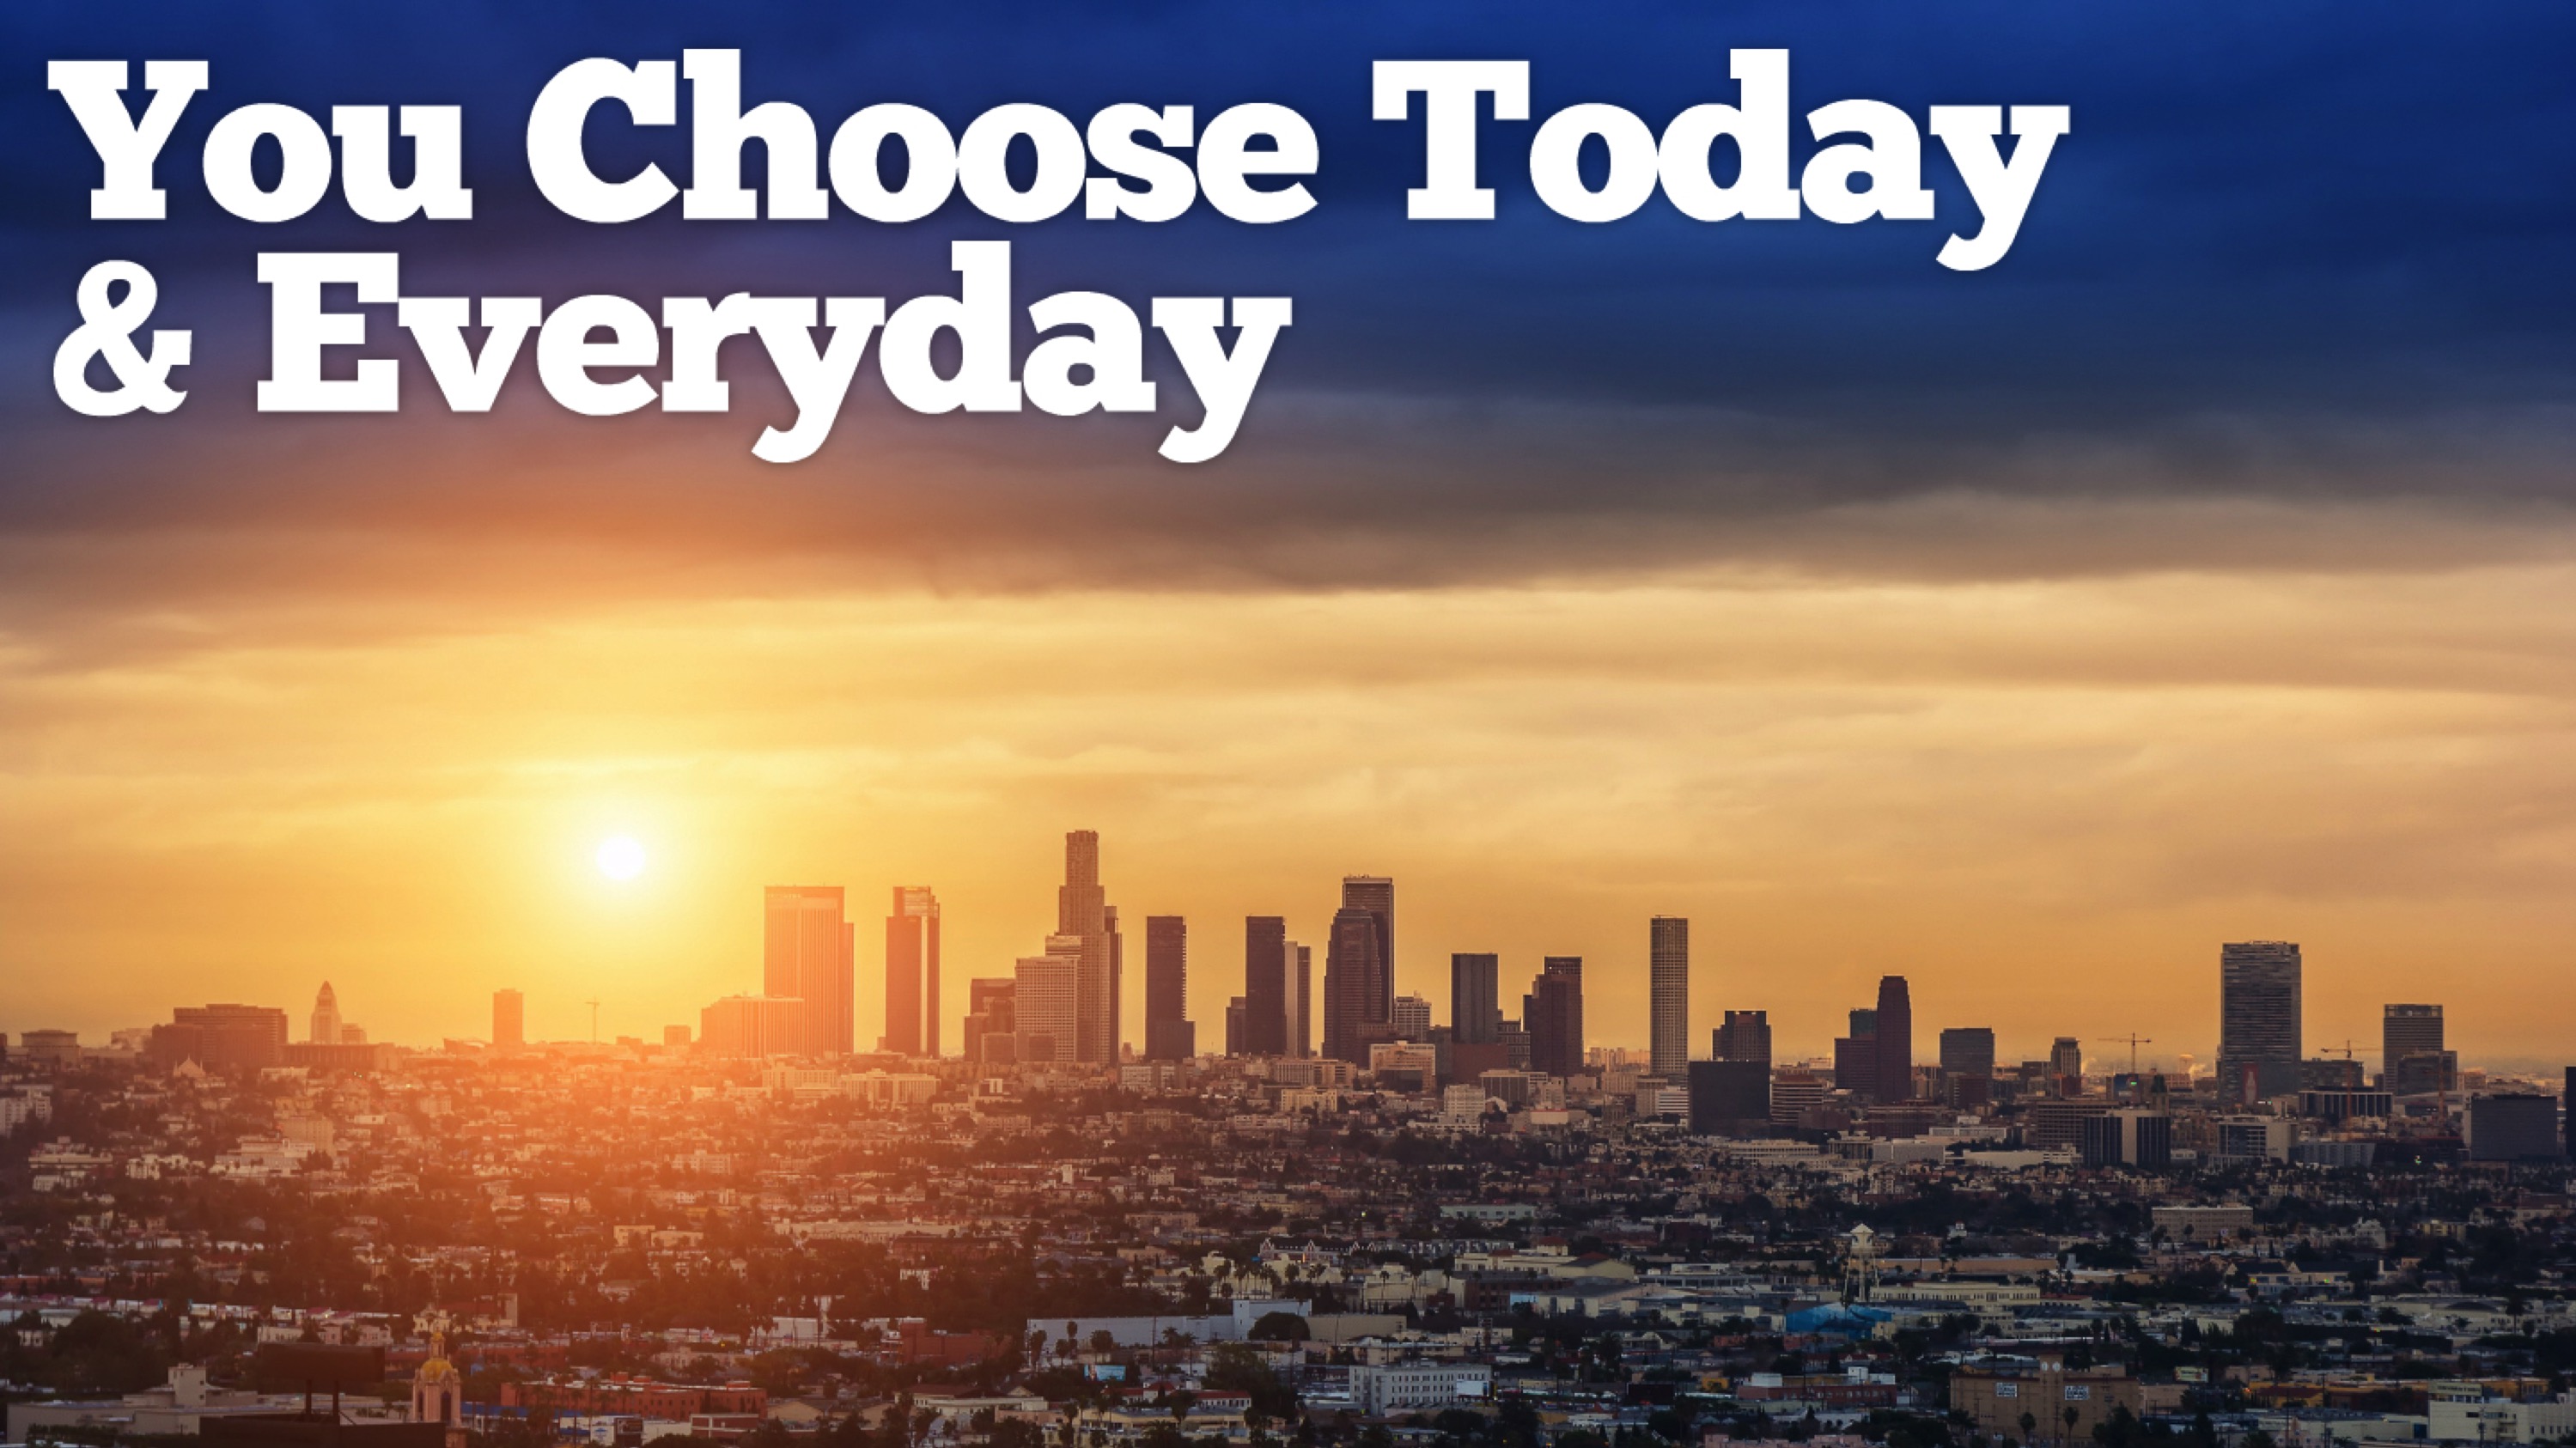 Wade Mikels - "You Choose Today and Everyday"